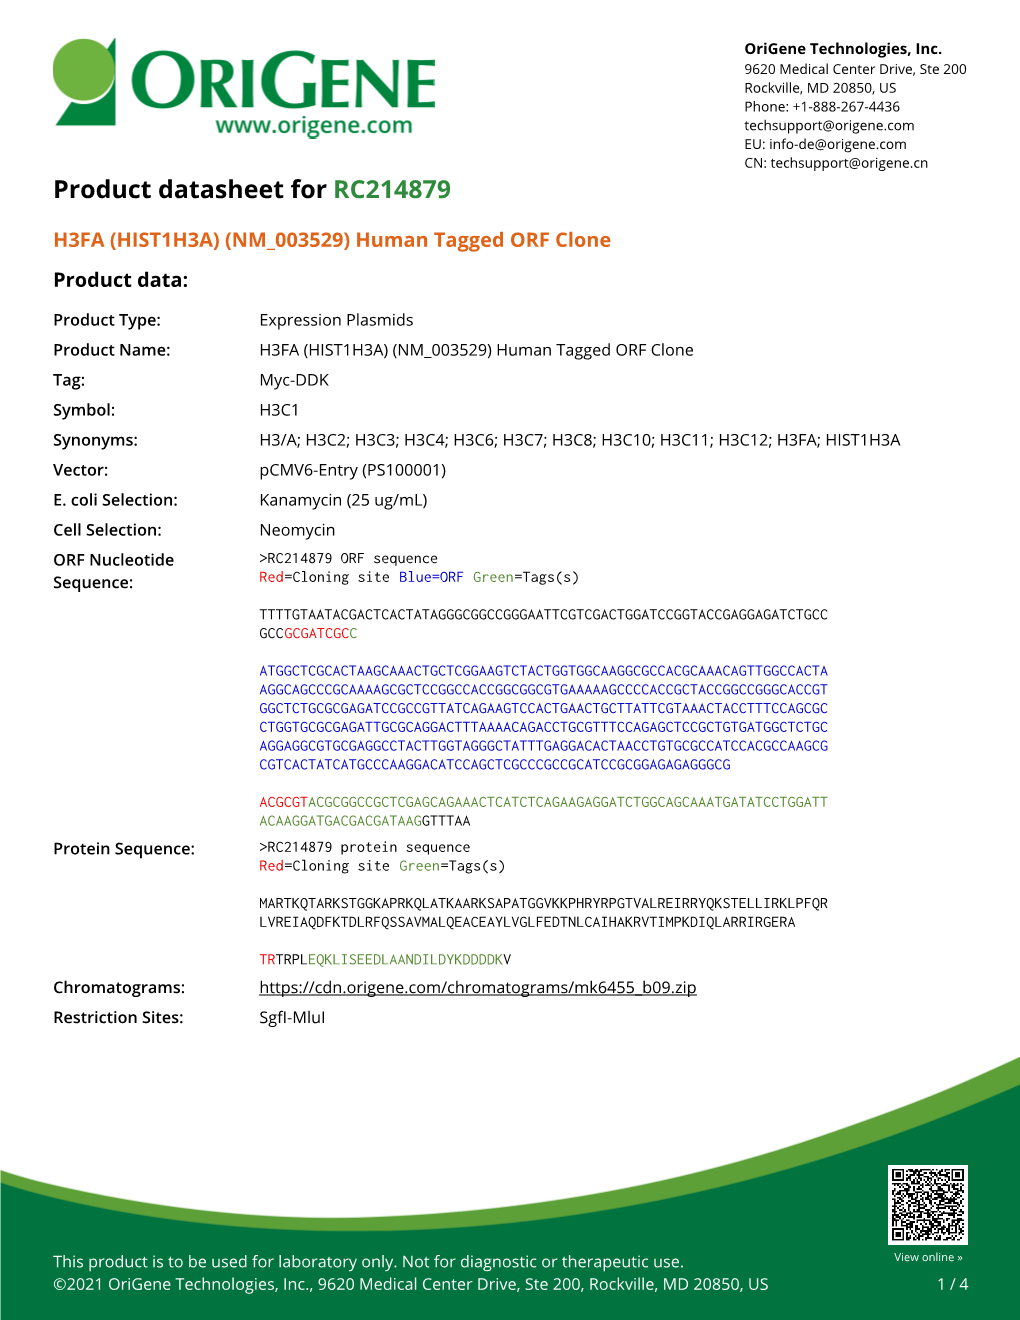 H3FA (HIST1H3A) (NM 003529) Human Tagged ORF Clone Product Data